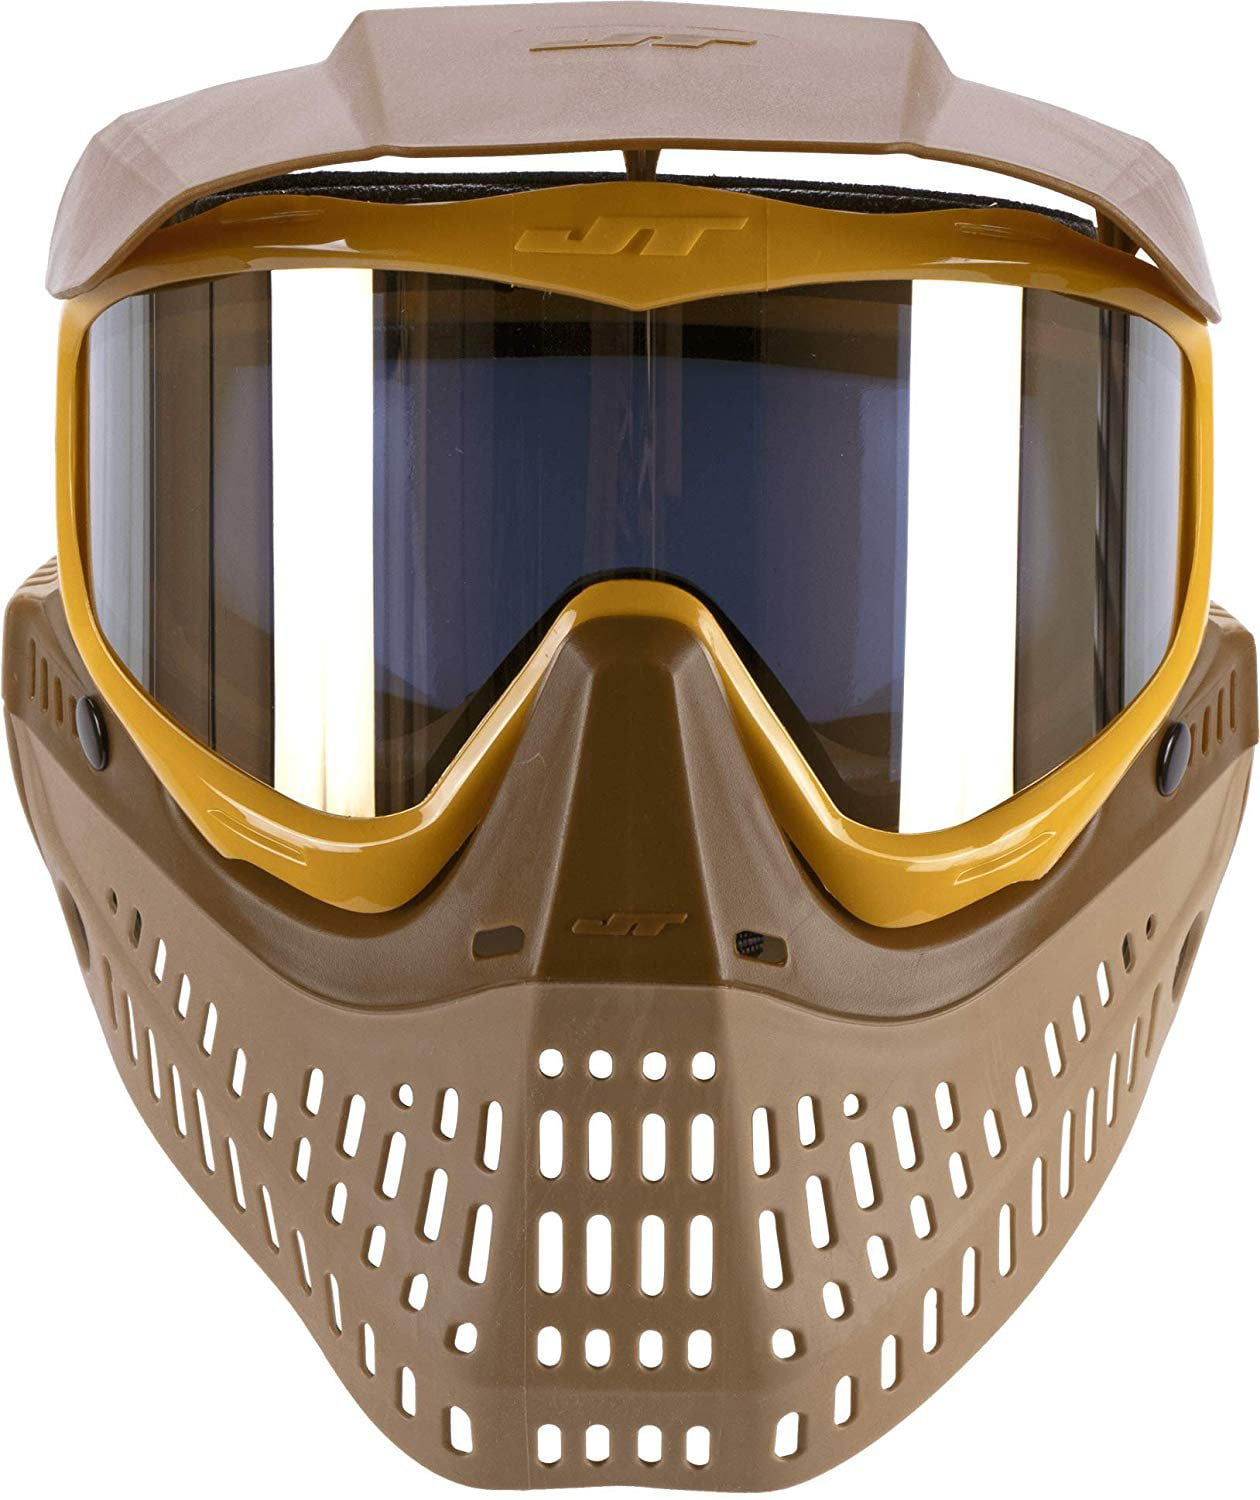 JT Spectra Proflex Paintball Goggles Mask LE Brown Tan Gold 